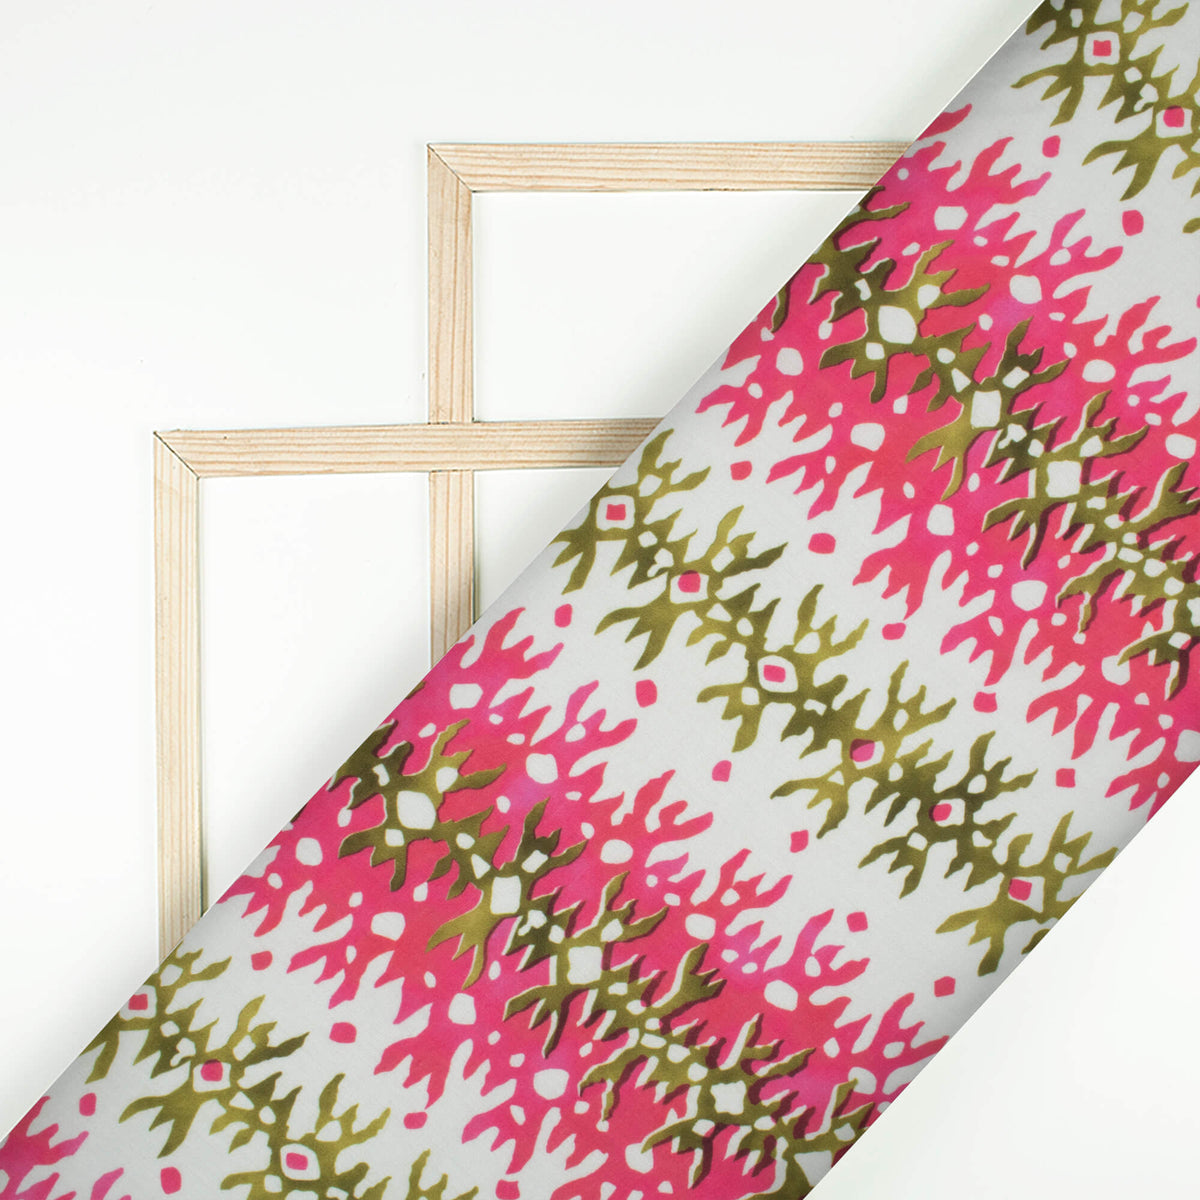 Punch Pink And Moss Green Abstract Pattern Digital Print Poly Glazed Cotton Fabric